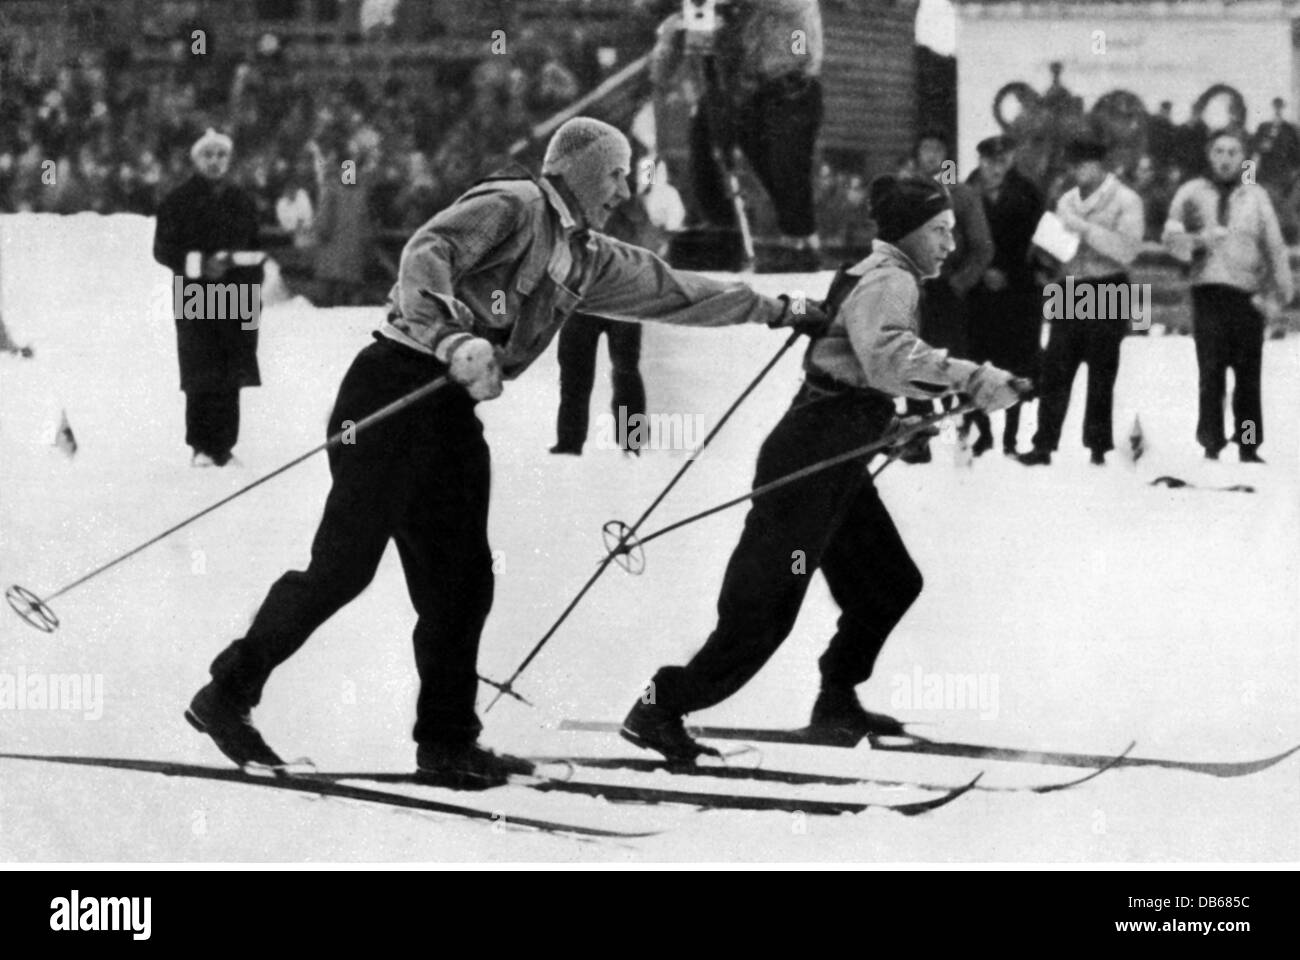 sports, Olympic Games, Garmisch-Partenkirchen 6.2.- 16.2.1936, nordic skiing, cross-country skiing, 4x10 km relay, Finnish team, Klaes Karppinen relieving Sulo Nurmela, Finnland, 4 x 10, champion, gold, winner, athlet, ski, Nazi Germany, Third Reich, winter games, IV olympiad, Garmisch Partenkirchen, 1930s, 30s, 20th century, historic, historical, people, Additional-Rights-Clearences-Not Available Stock Photo